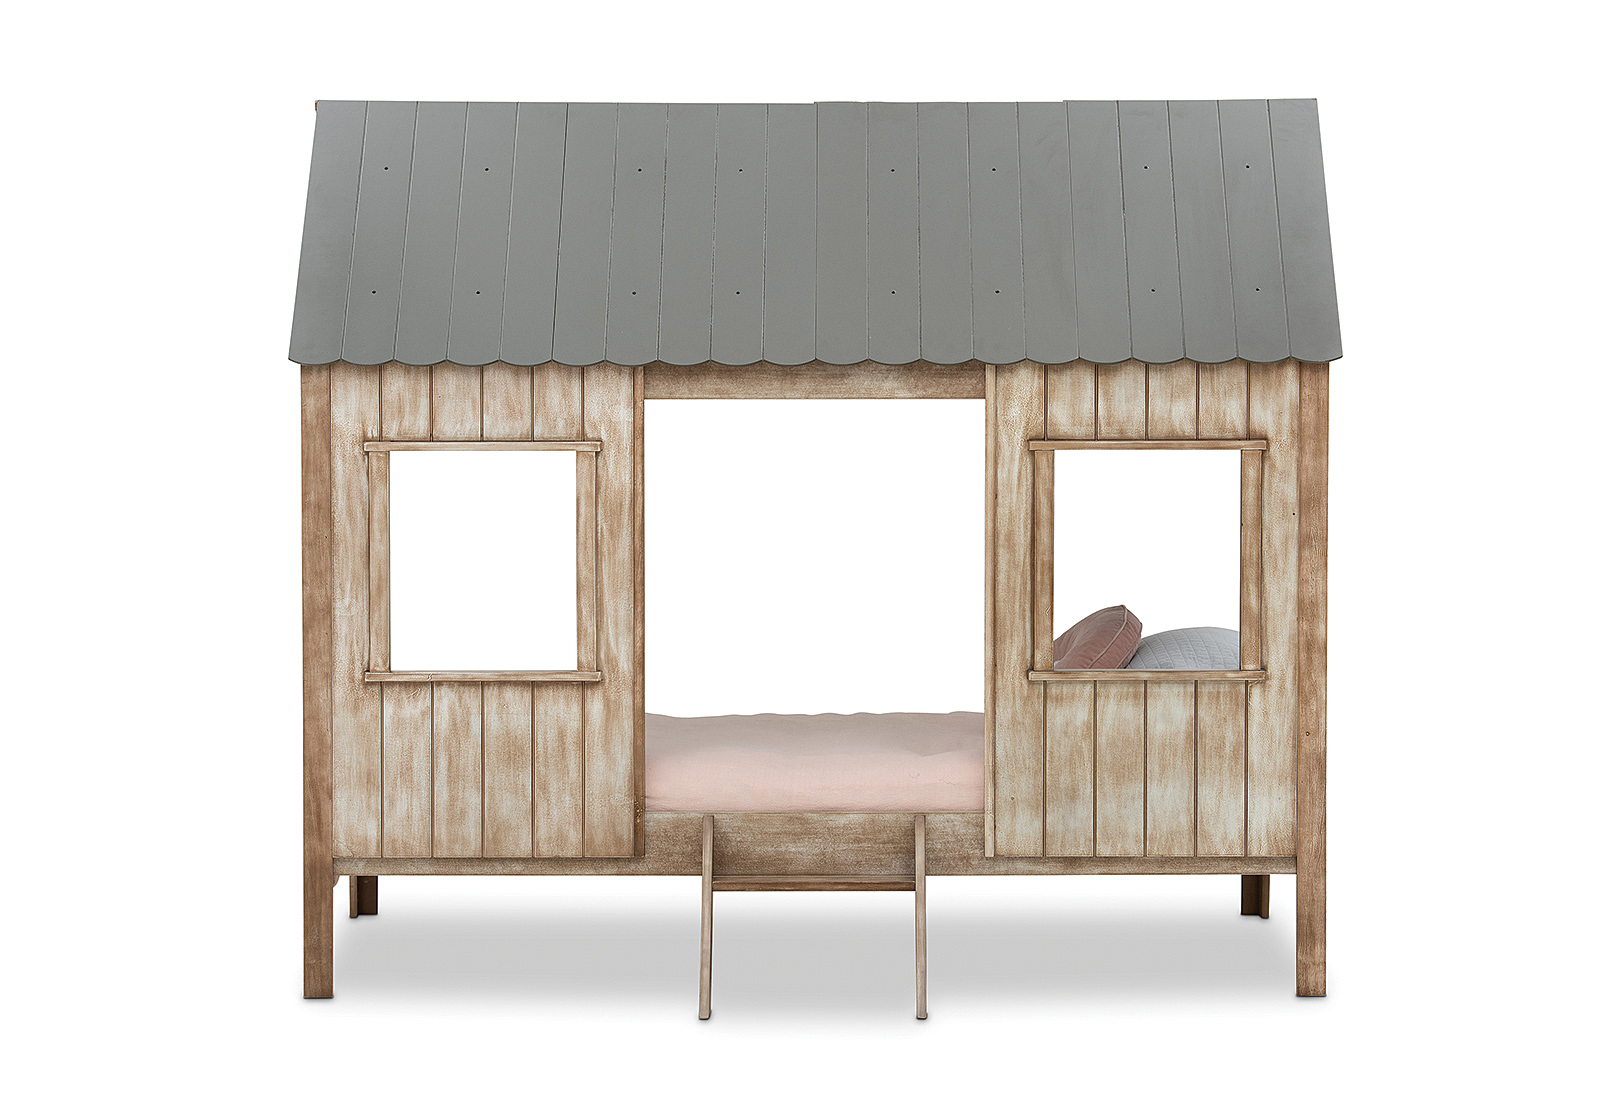 king single cubby house bed